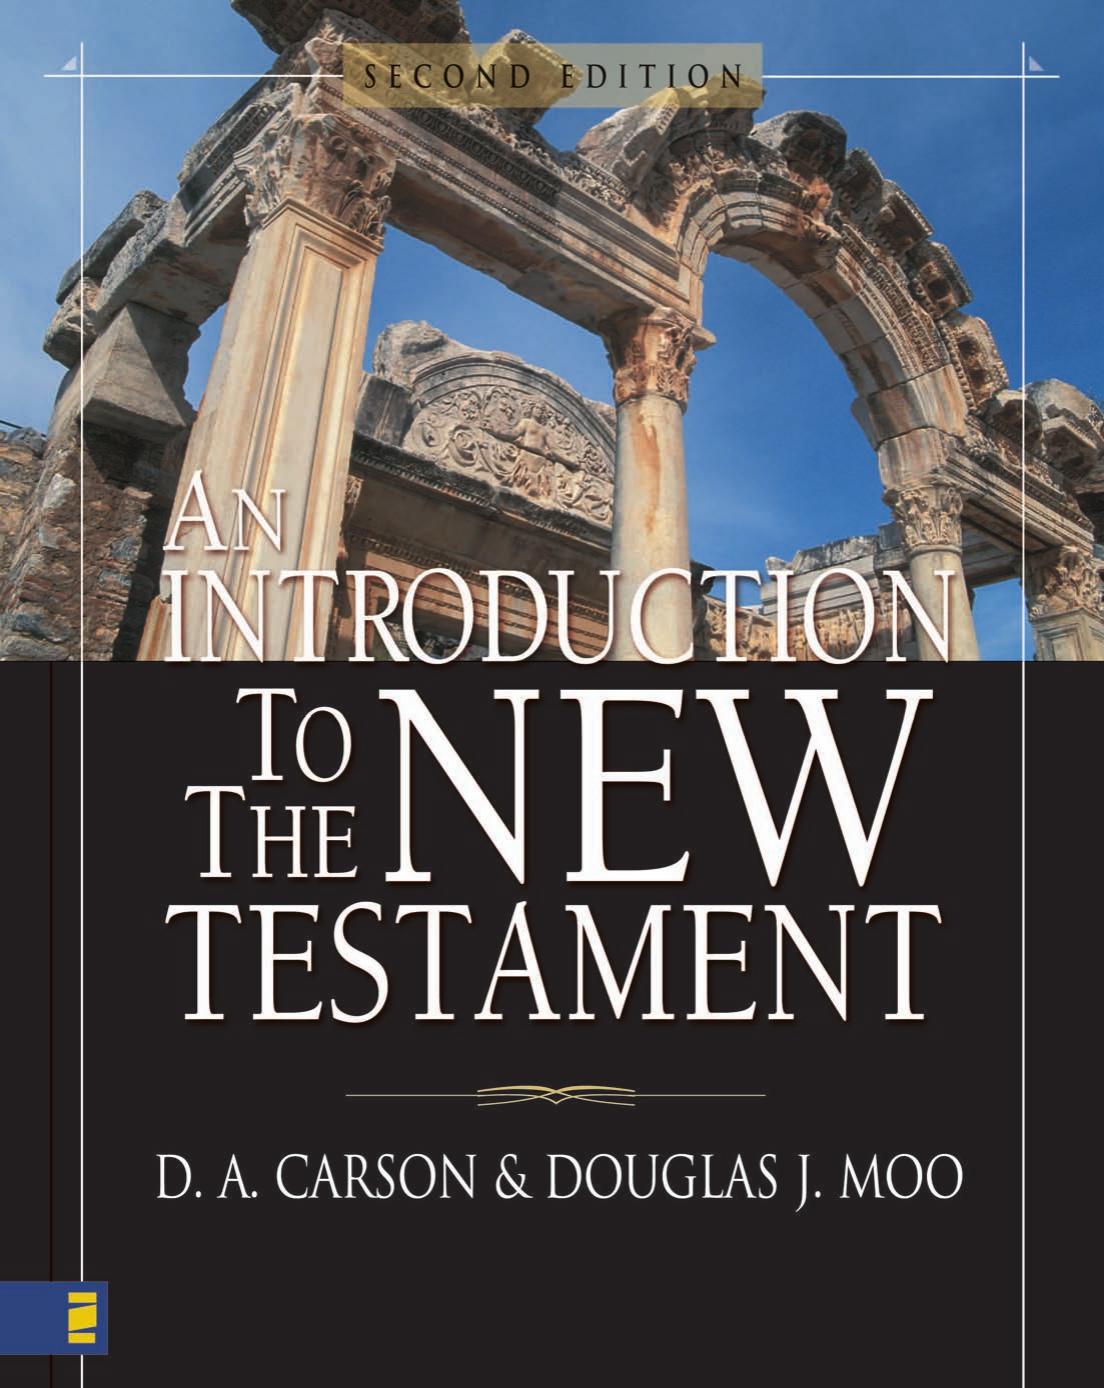 An Introduction to the New Testament: Second Edition